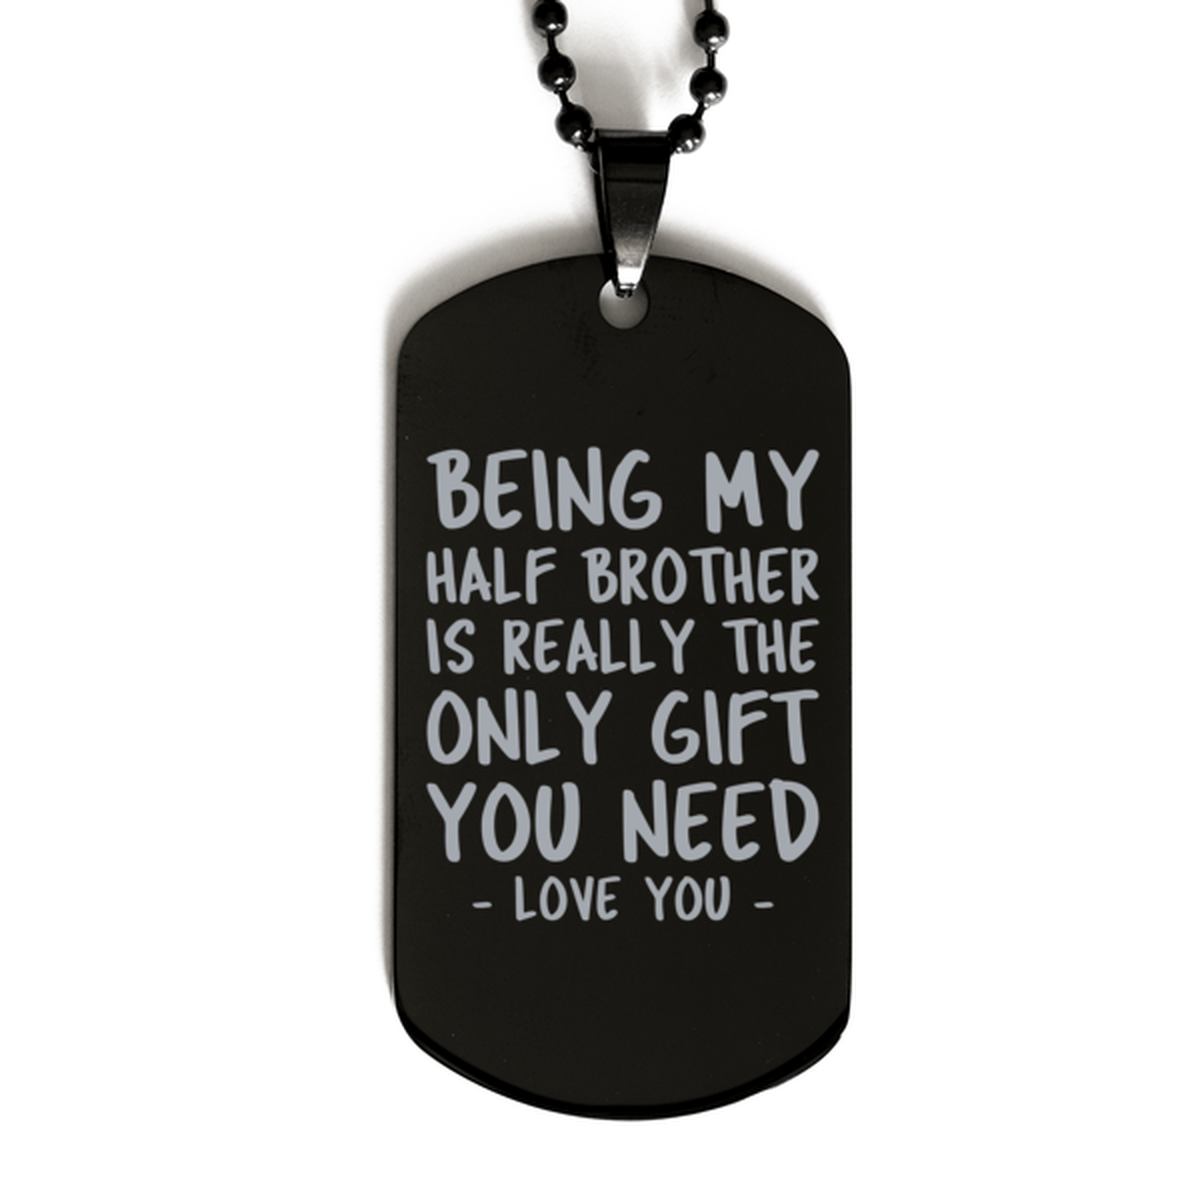 Funny Half Brother Black Dog Tag Necklace, Being My Half Brother Is Really the Only Gift You Need, Best Birthday Gifts for Half Brother